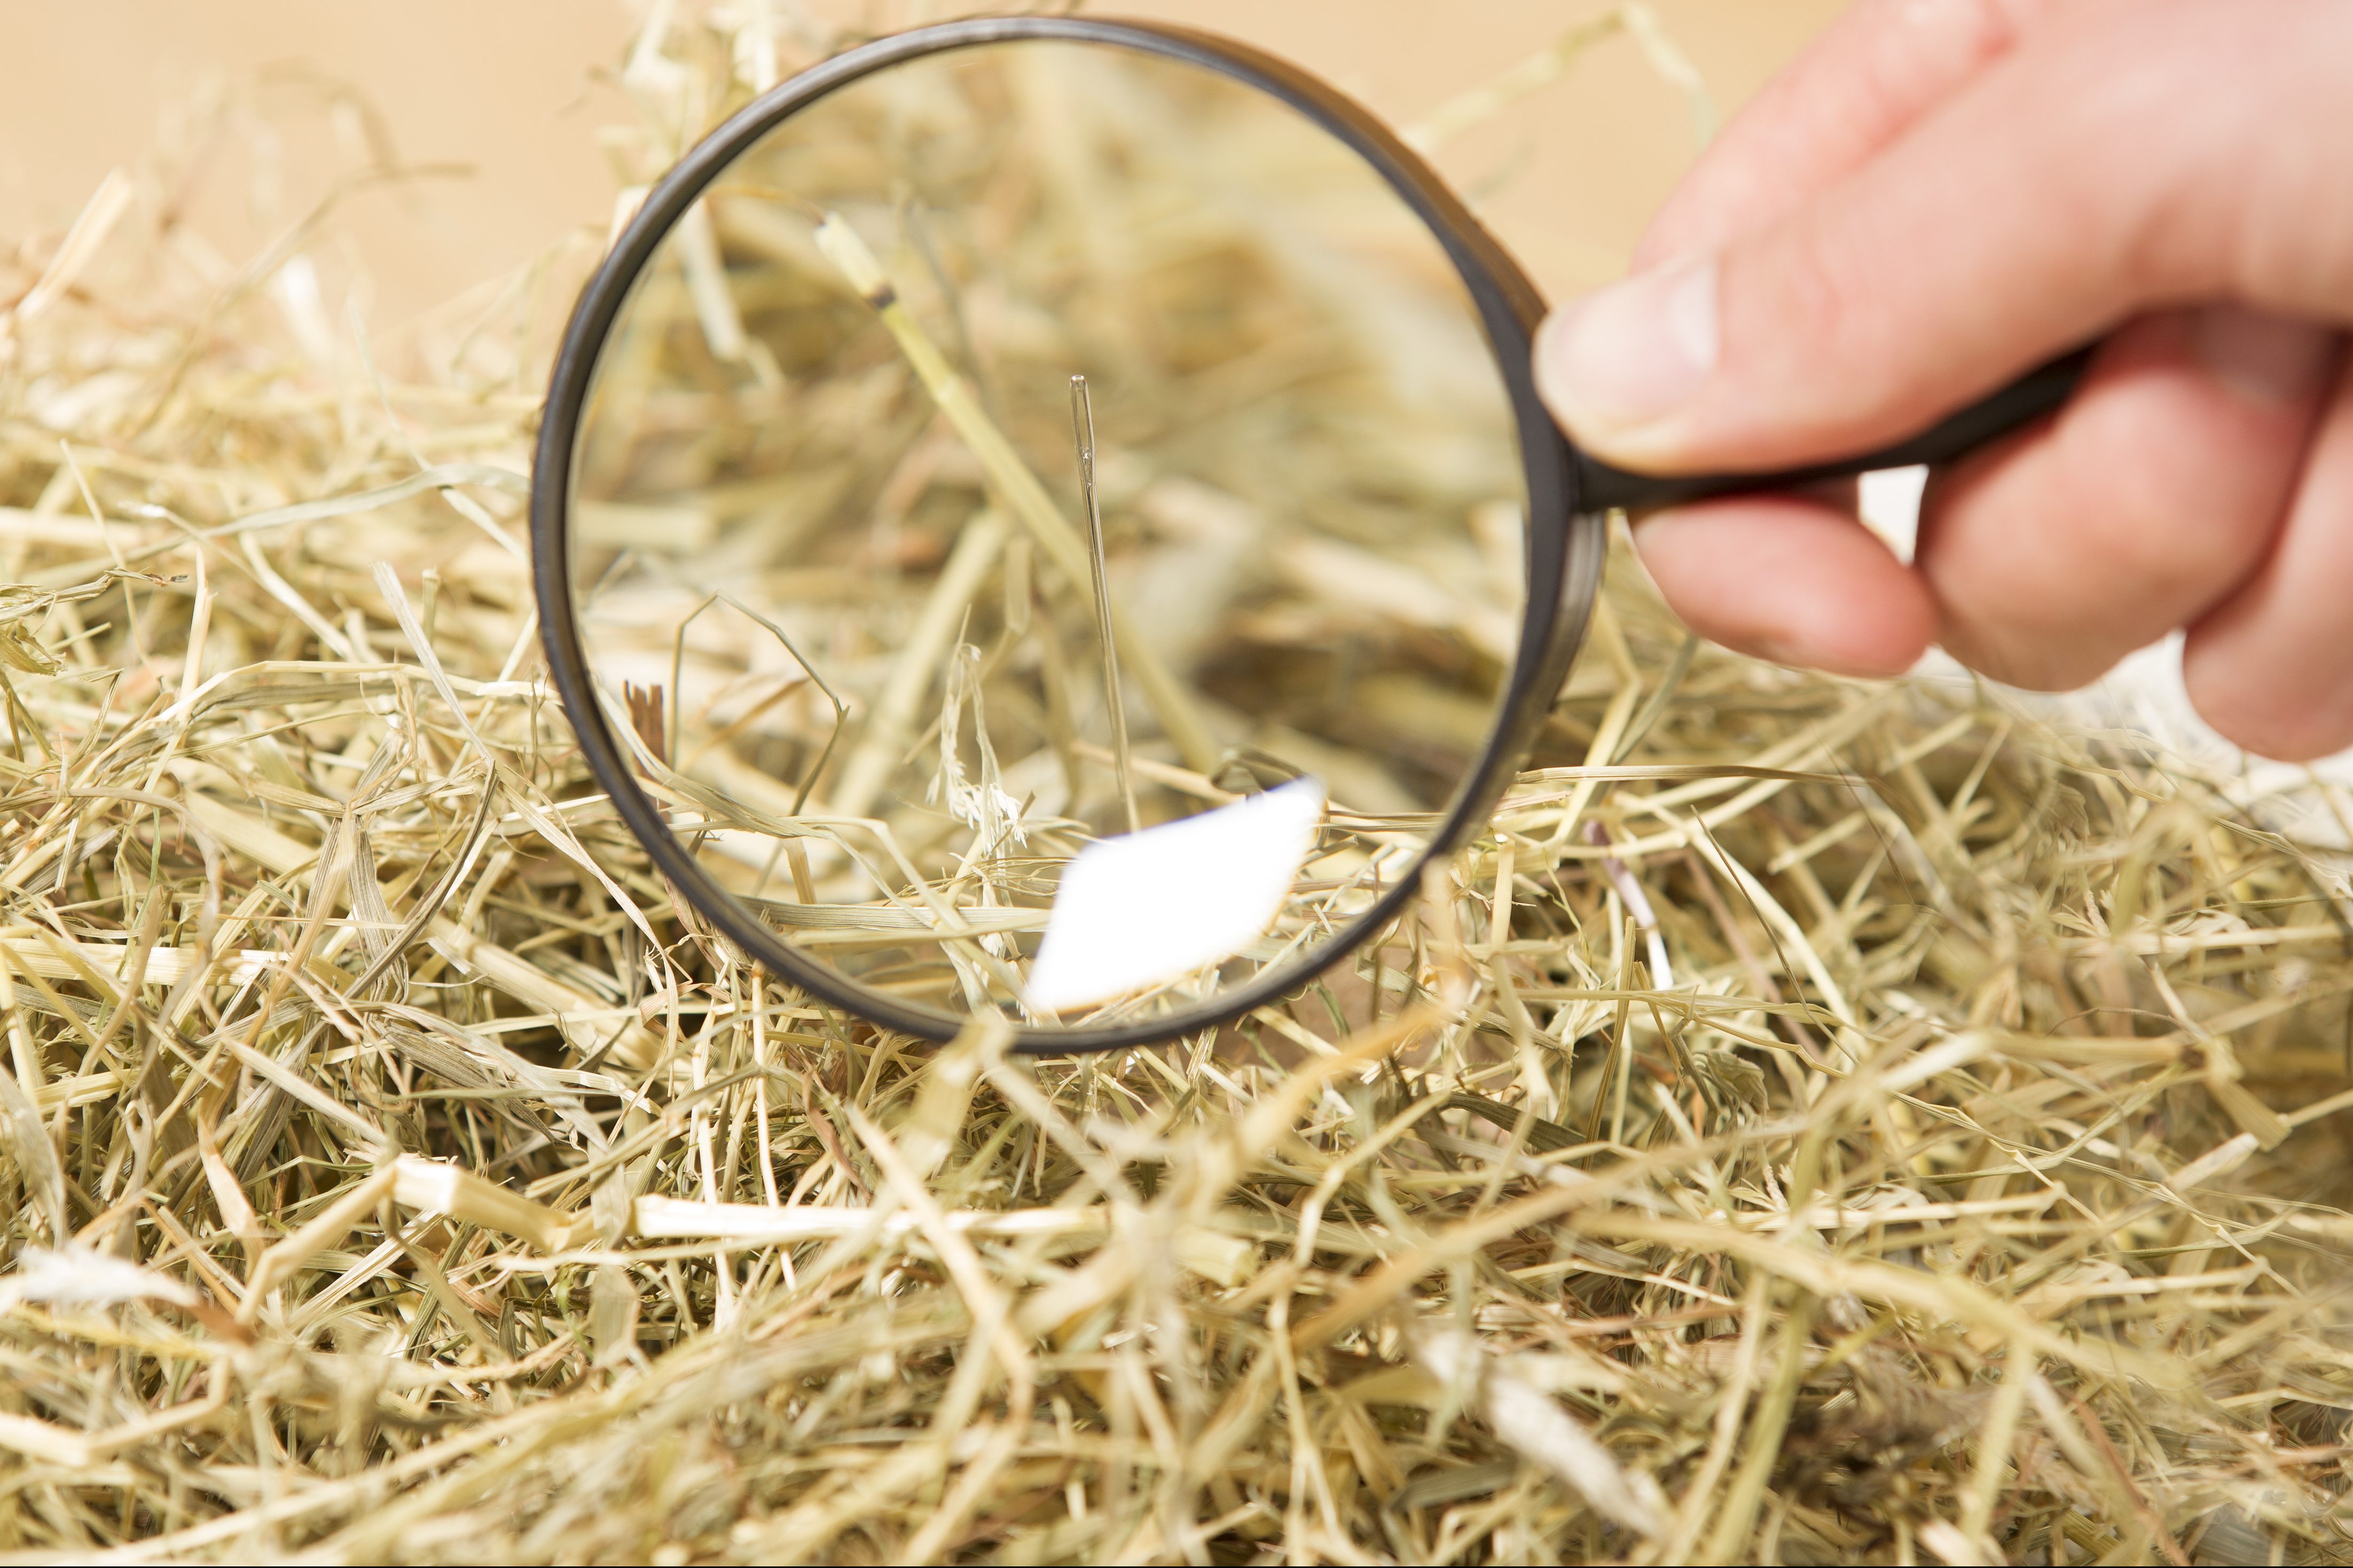 A magnifying glass reveals a needle in a haystack